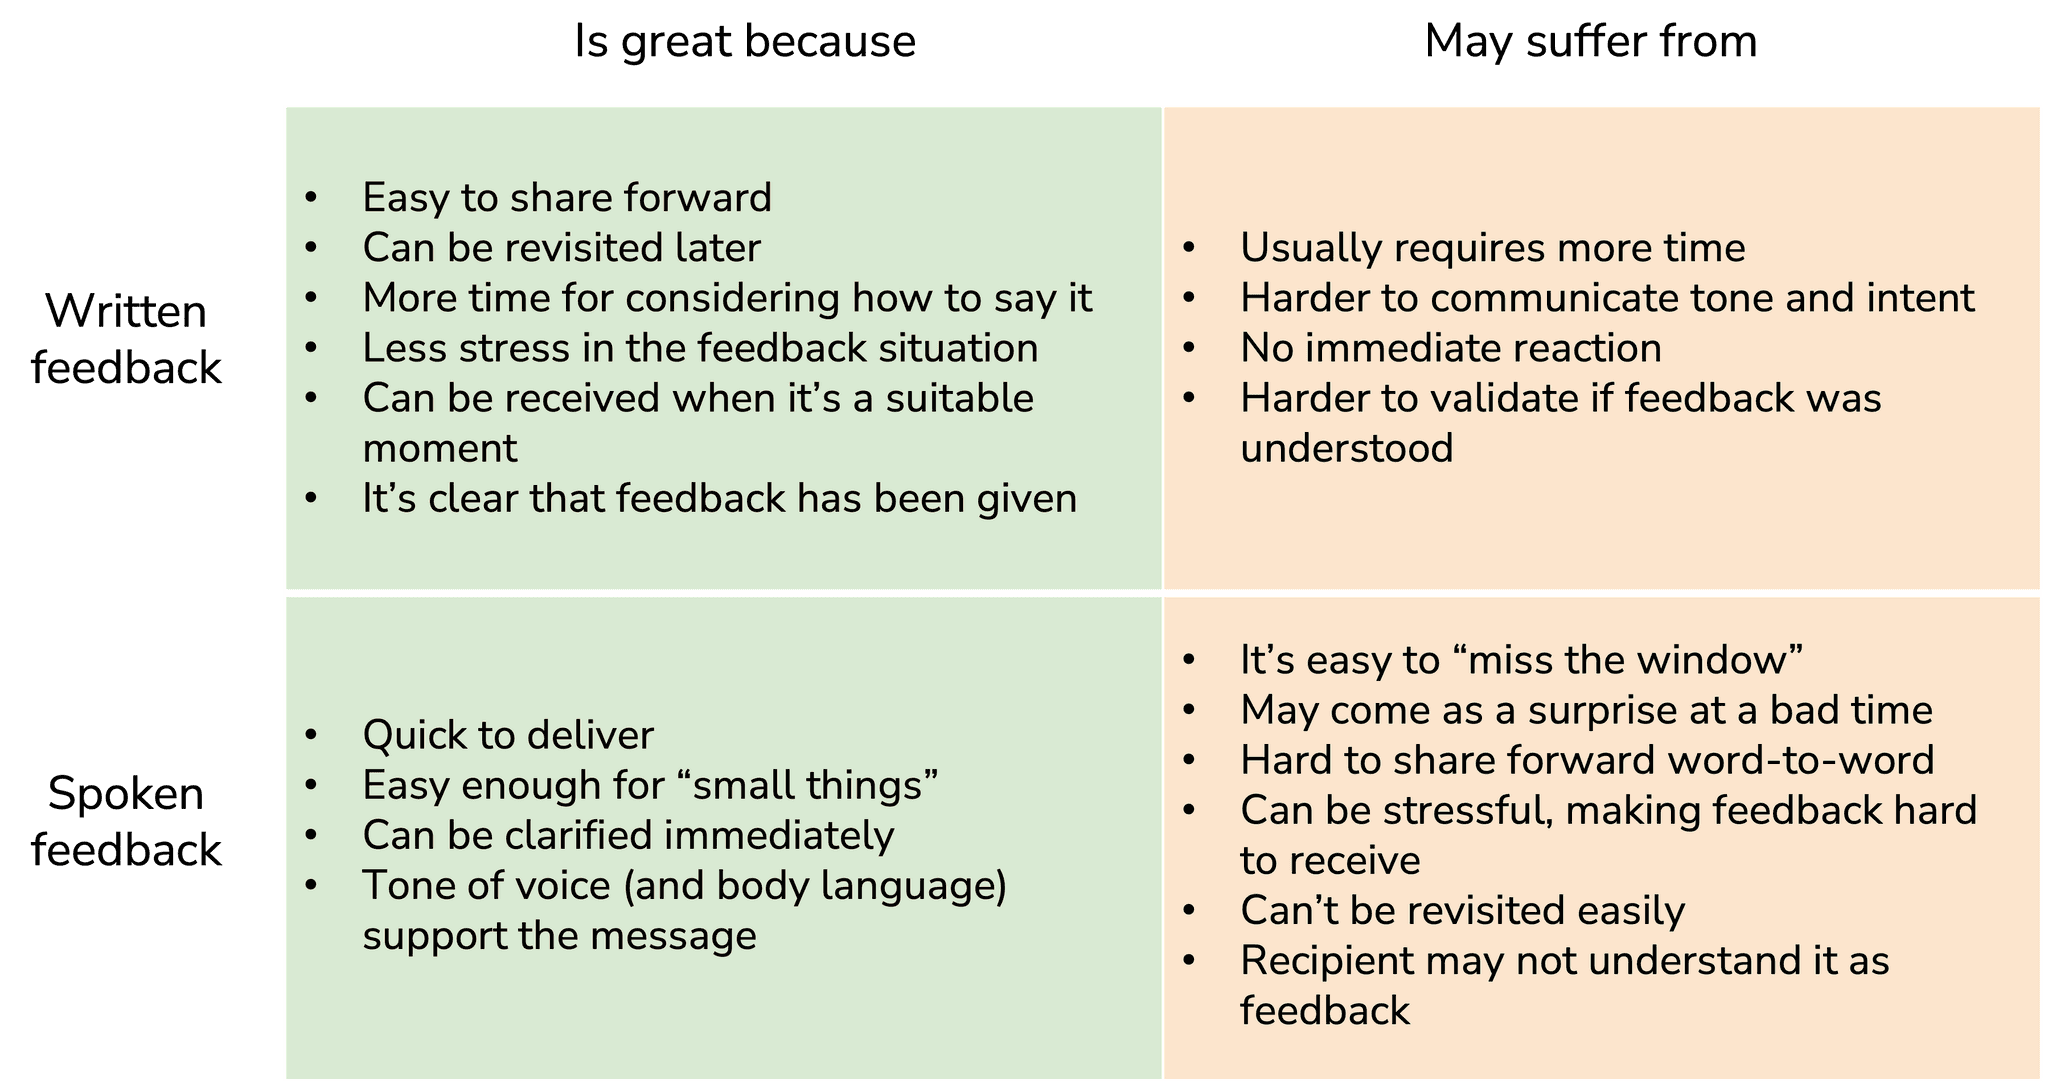 Table of spoken and written feedback pros and cons.